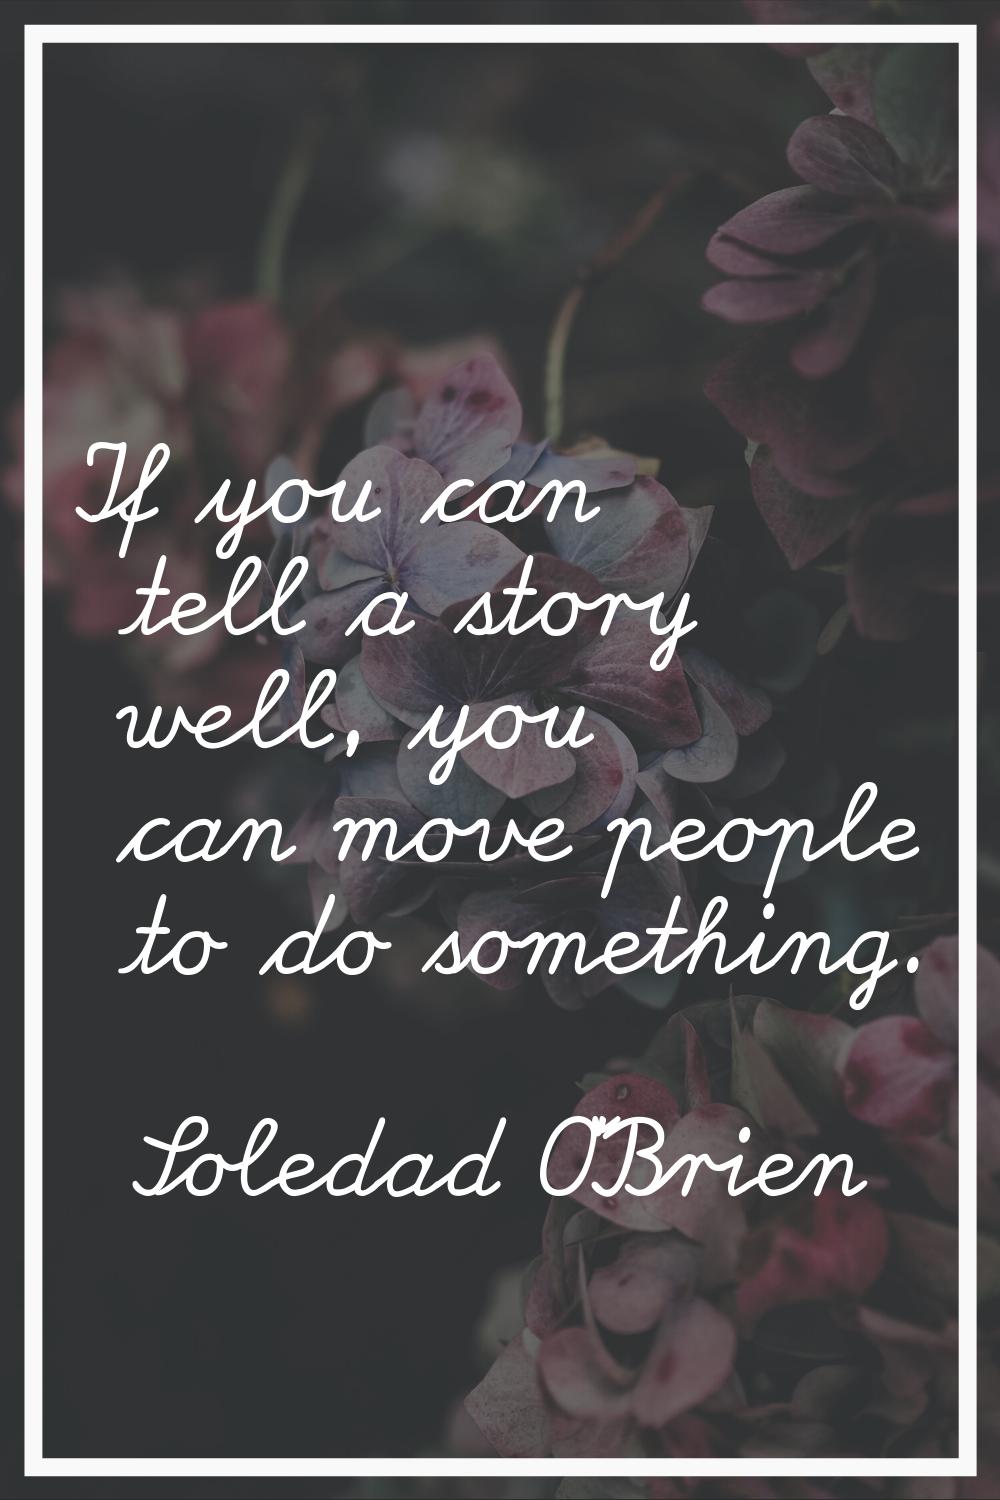 If you can tell a story well, you can move people to do something.